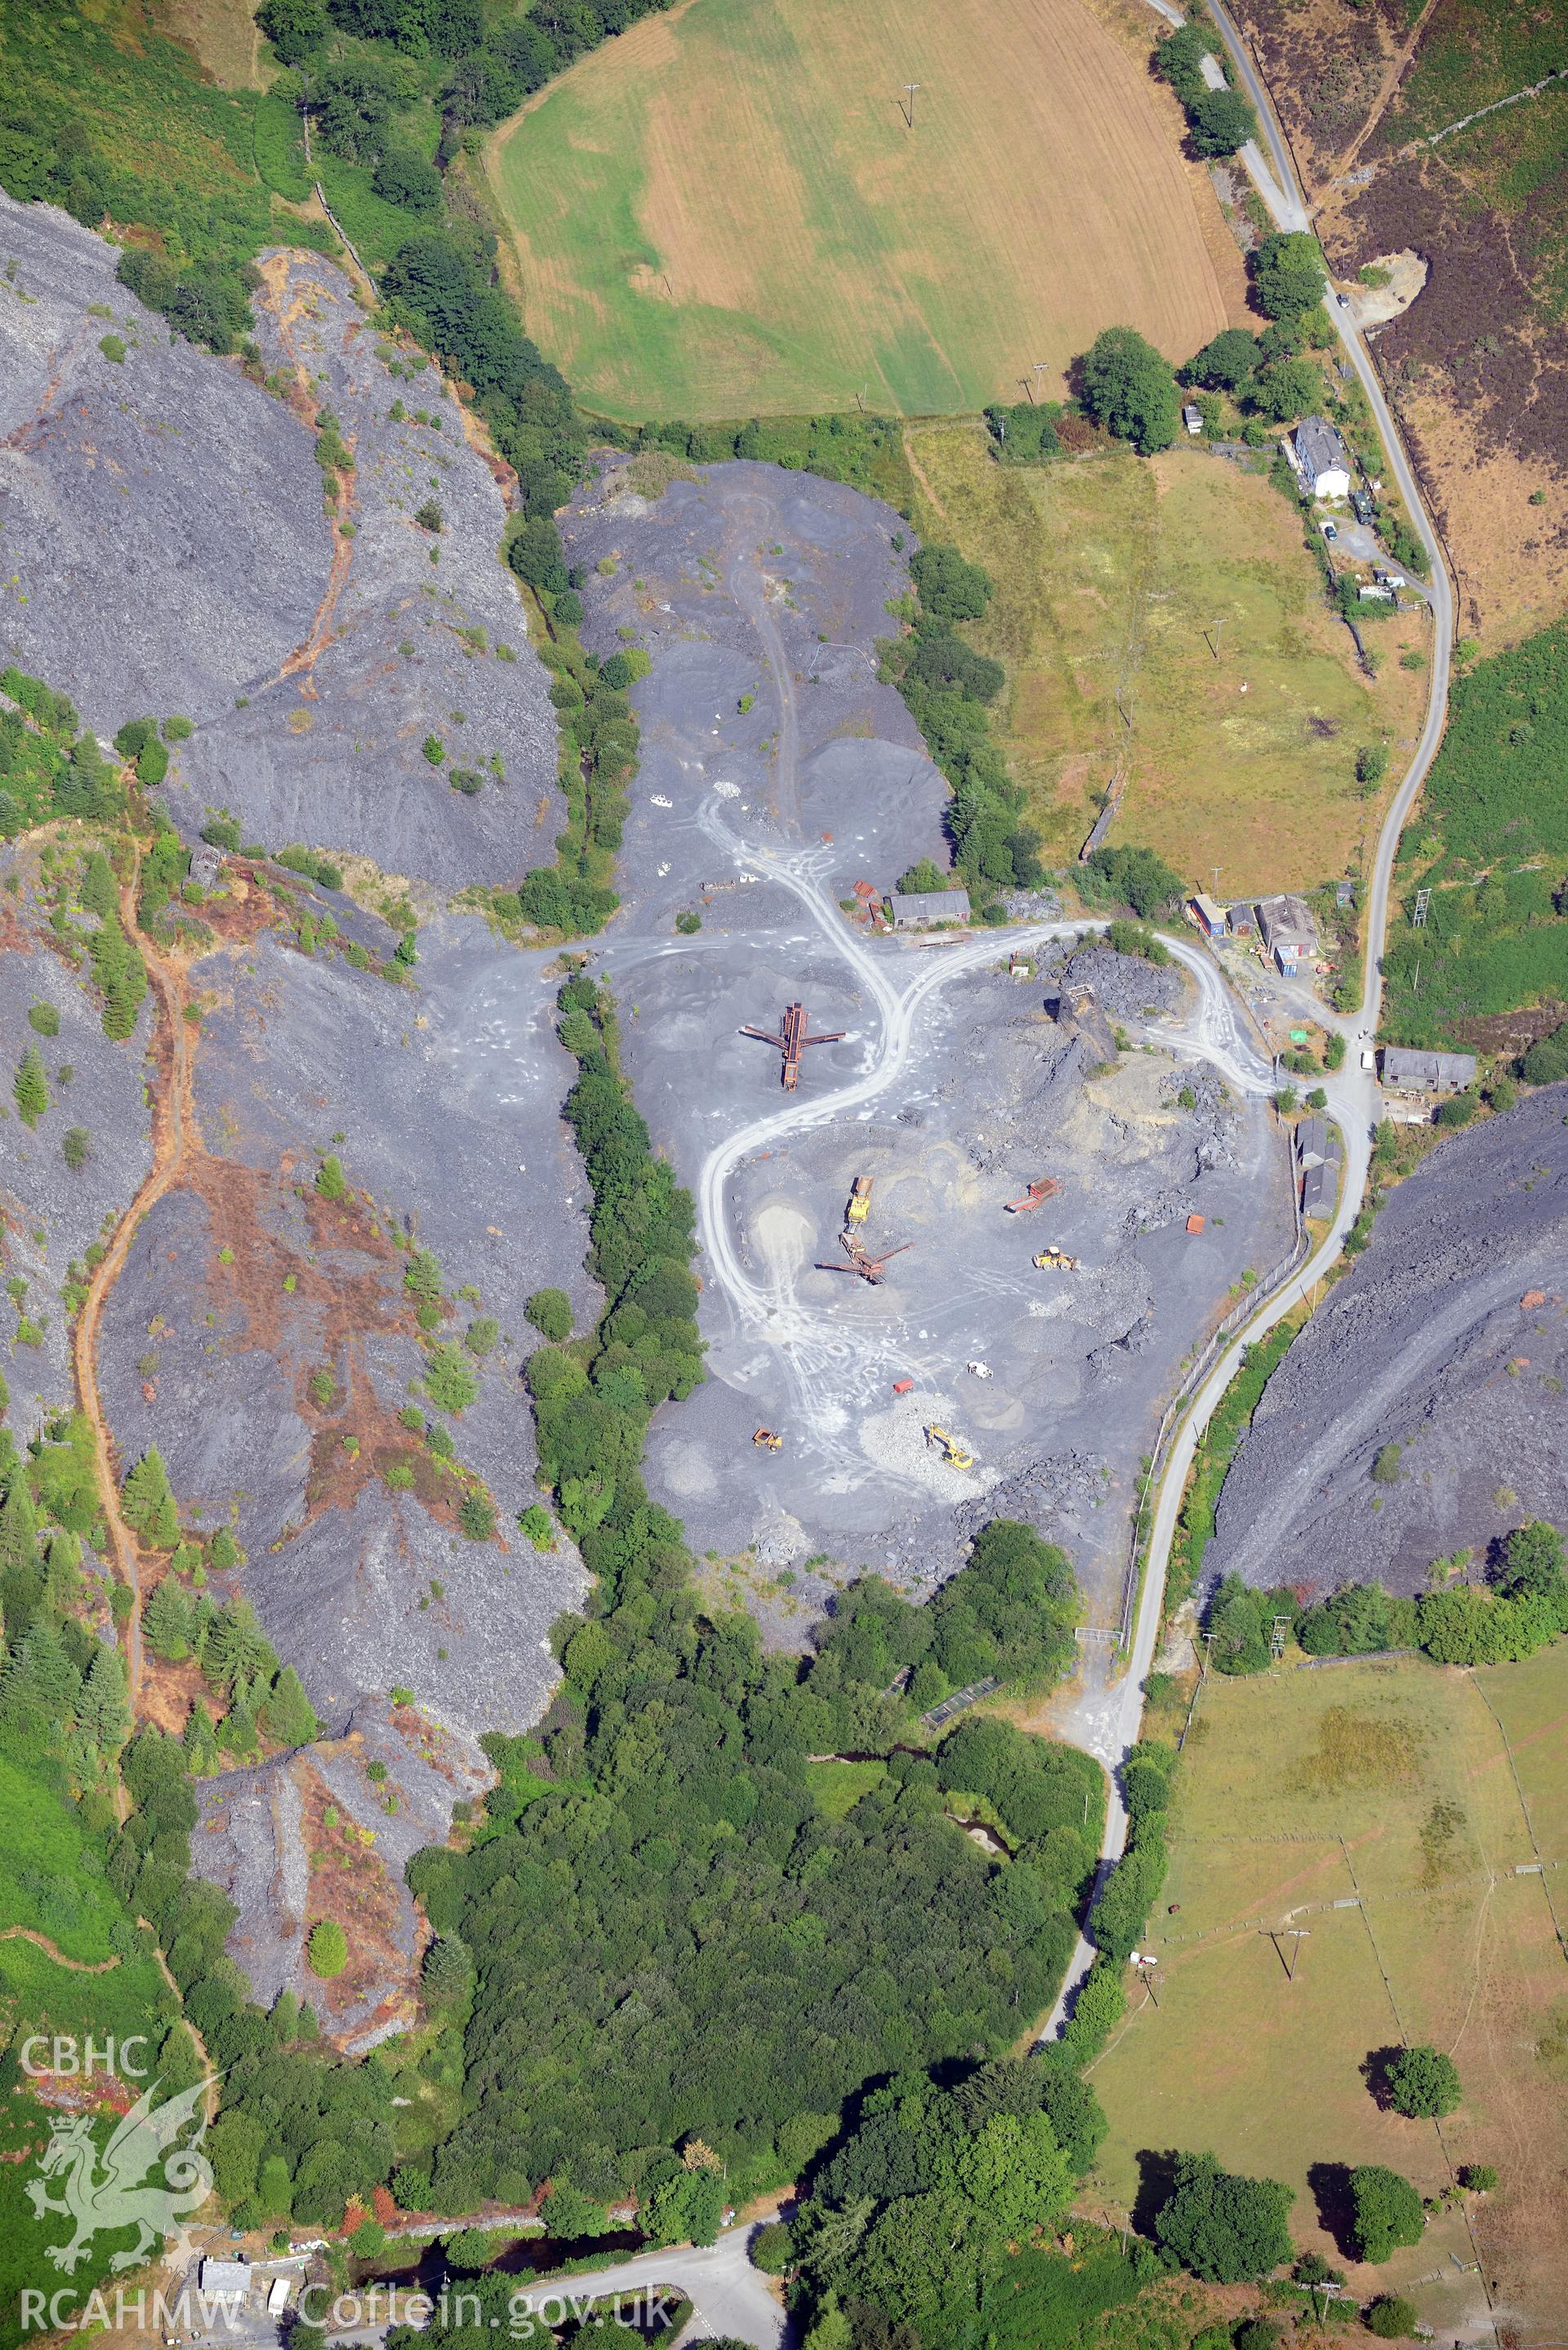 Royal Commission aerial photography of Aberllefenni Slate Quarry and landscape taken on 19th July 2018 during the 2018 drought.